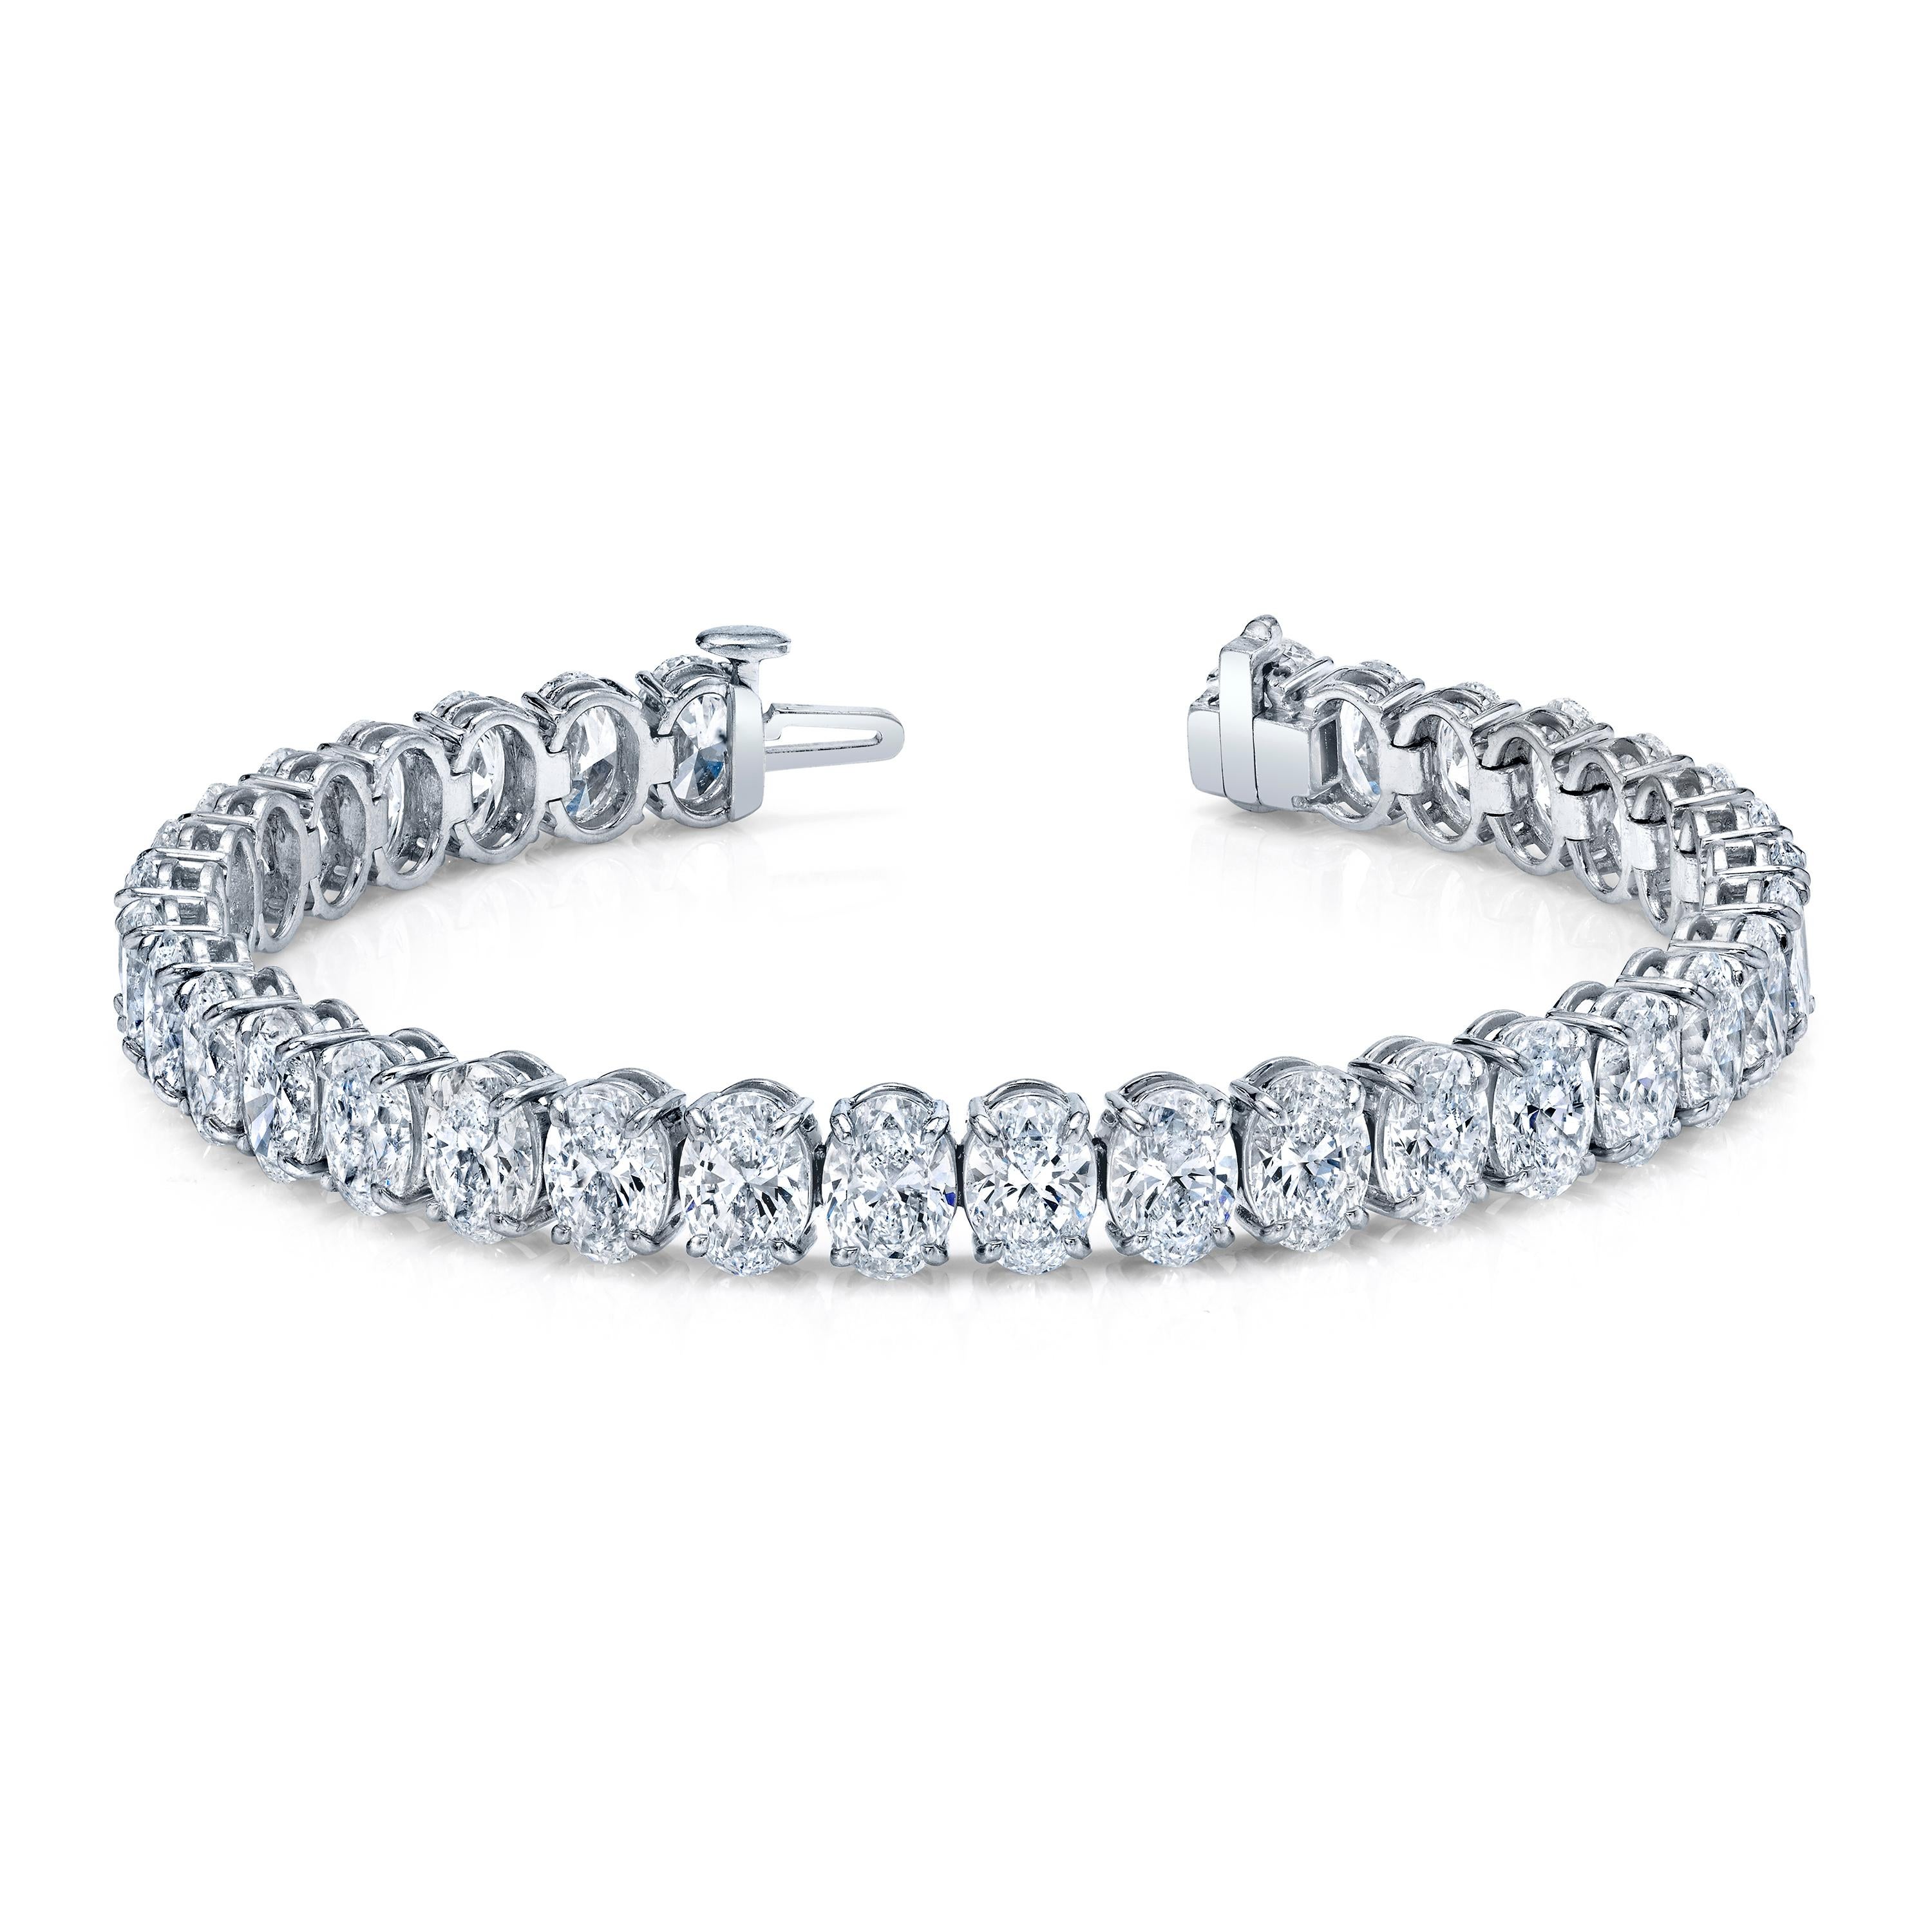 34 Oval Cut Diamonds set in straight line 4-prong platinum bracelet.
24 carats total weight
Colors  D - F  Clarity  IF - SI1  GIA 
Length 7 inches